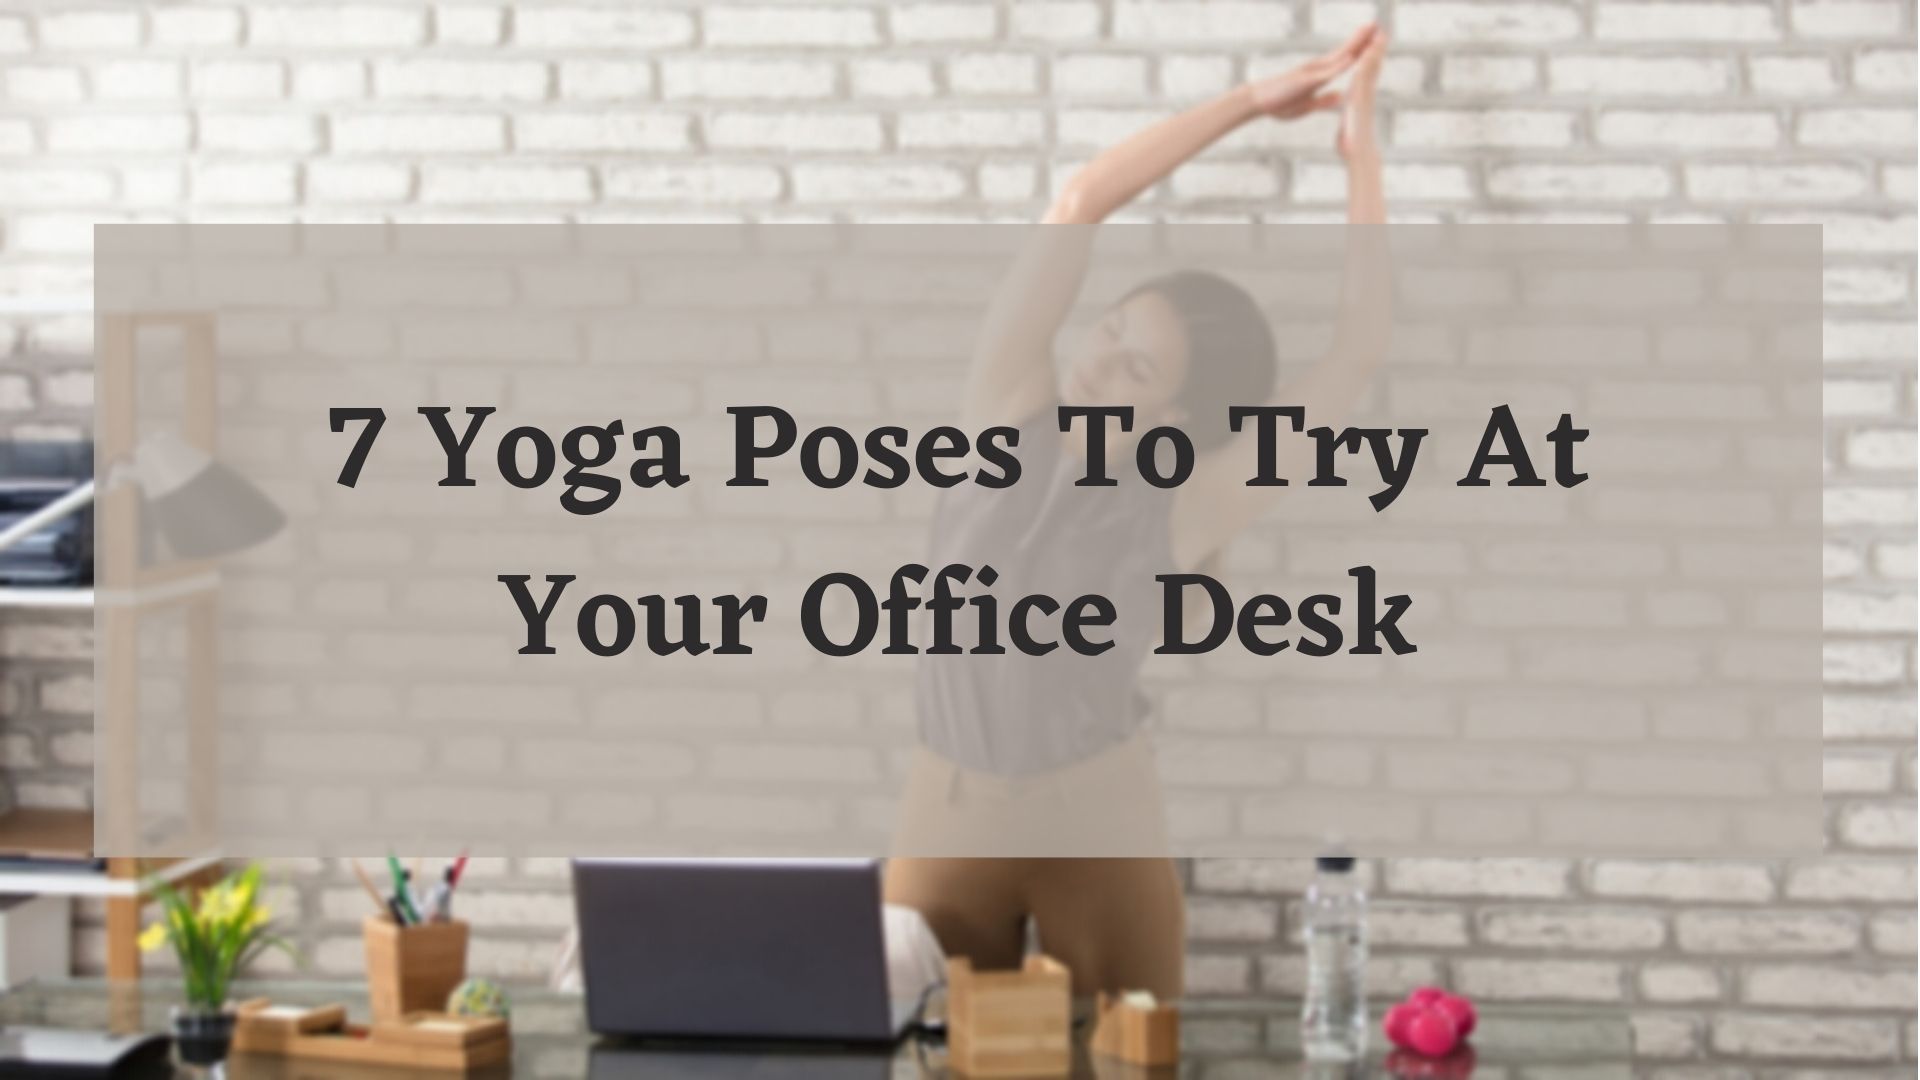 11 yoga poses you can do at your desk